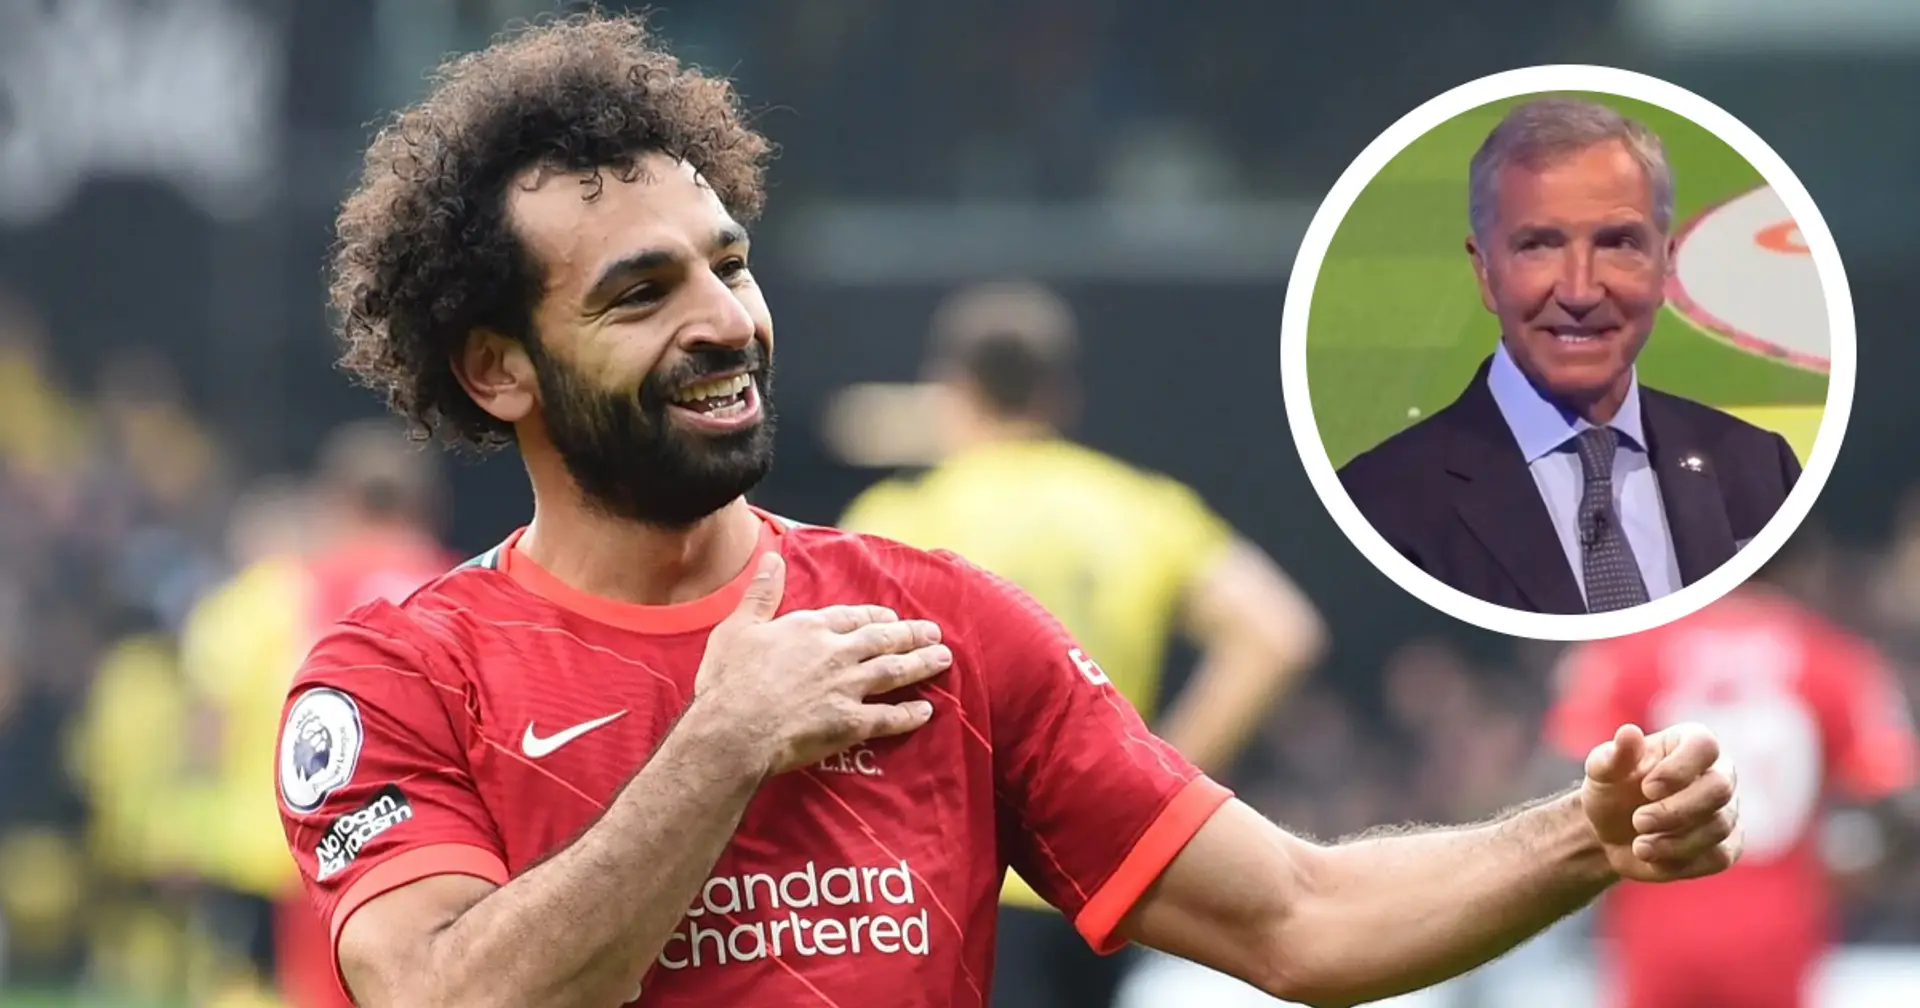 'He may even take it as a compliment': Souness names Salah most selfish player he's ever seen